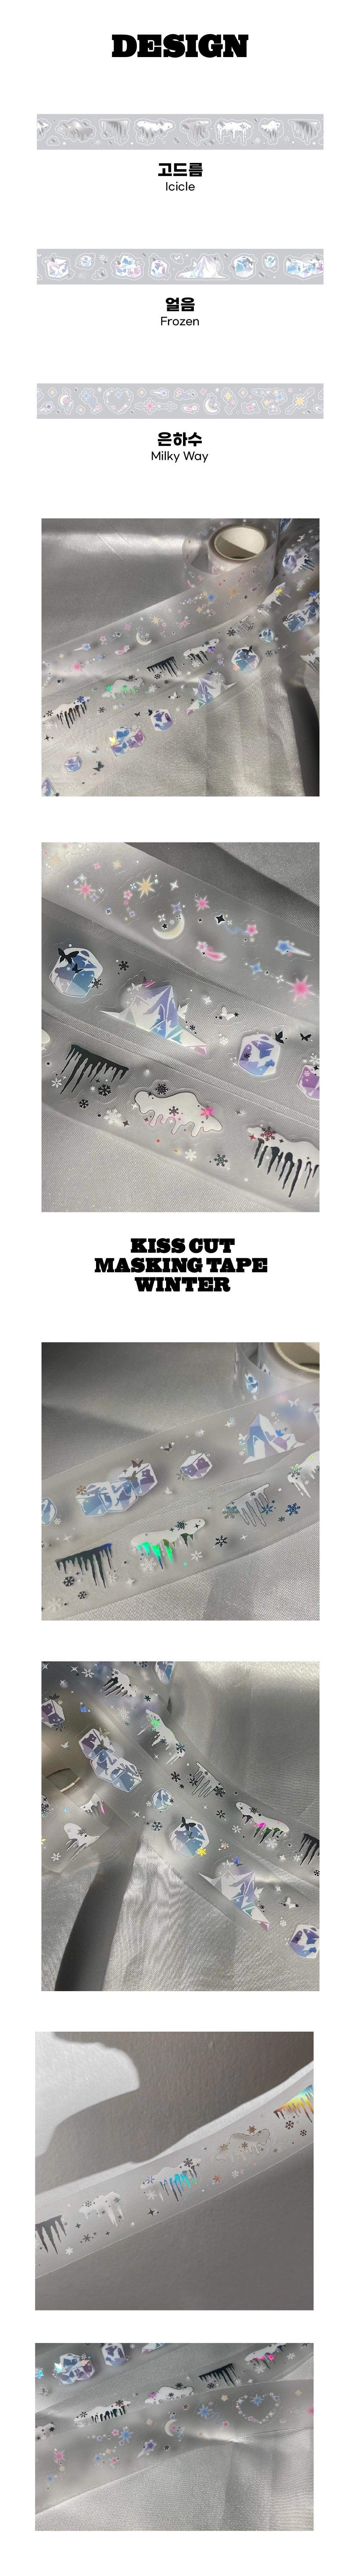 SOOANG Studio Kiss Cut Masking Tape Icicle, Frozen and Milky Way